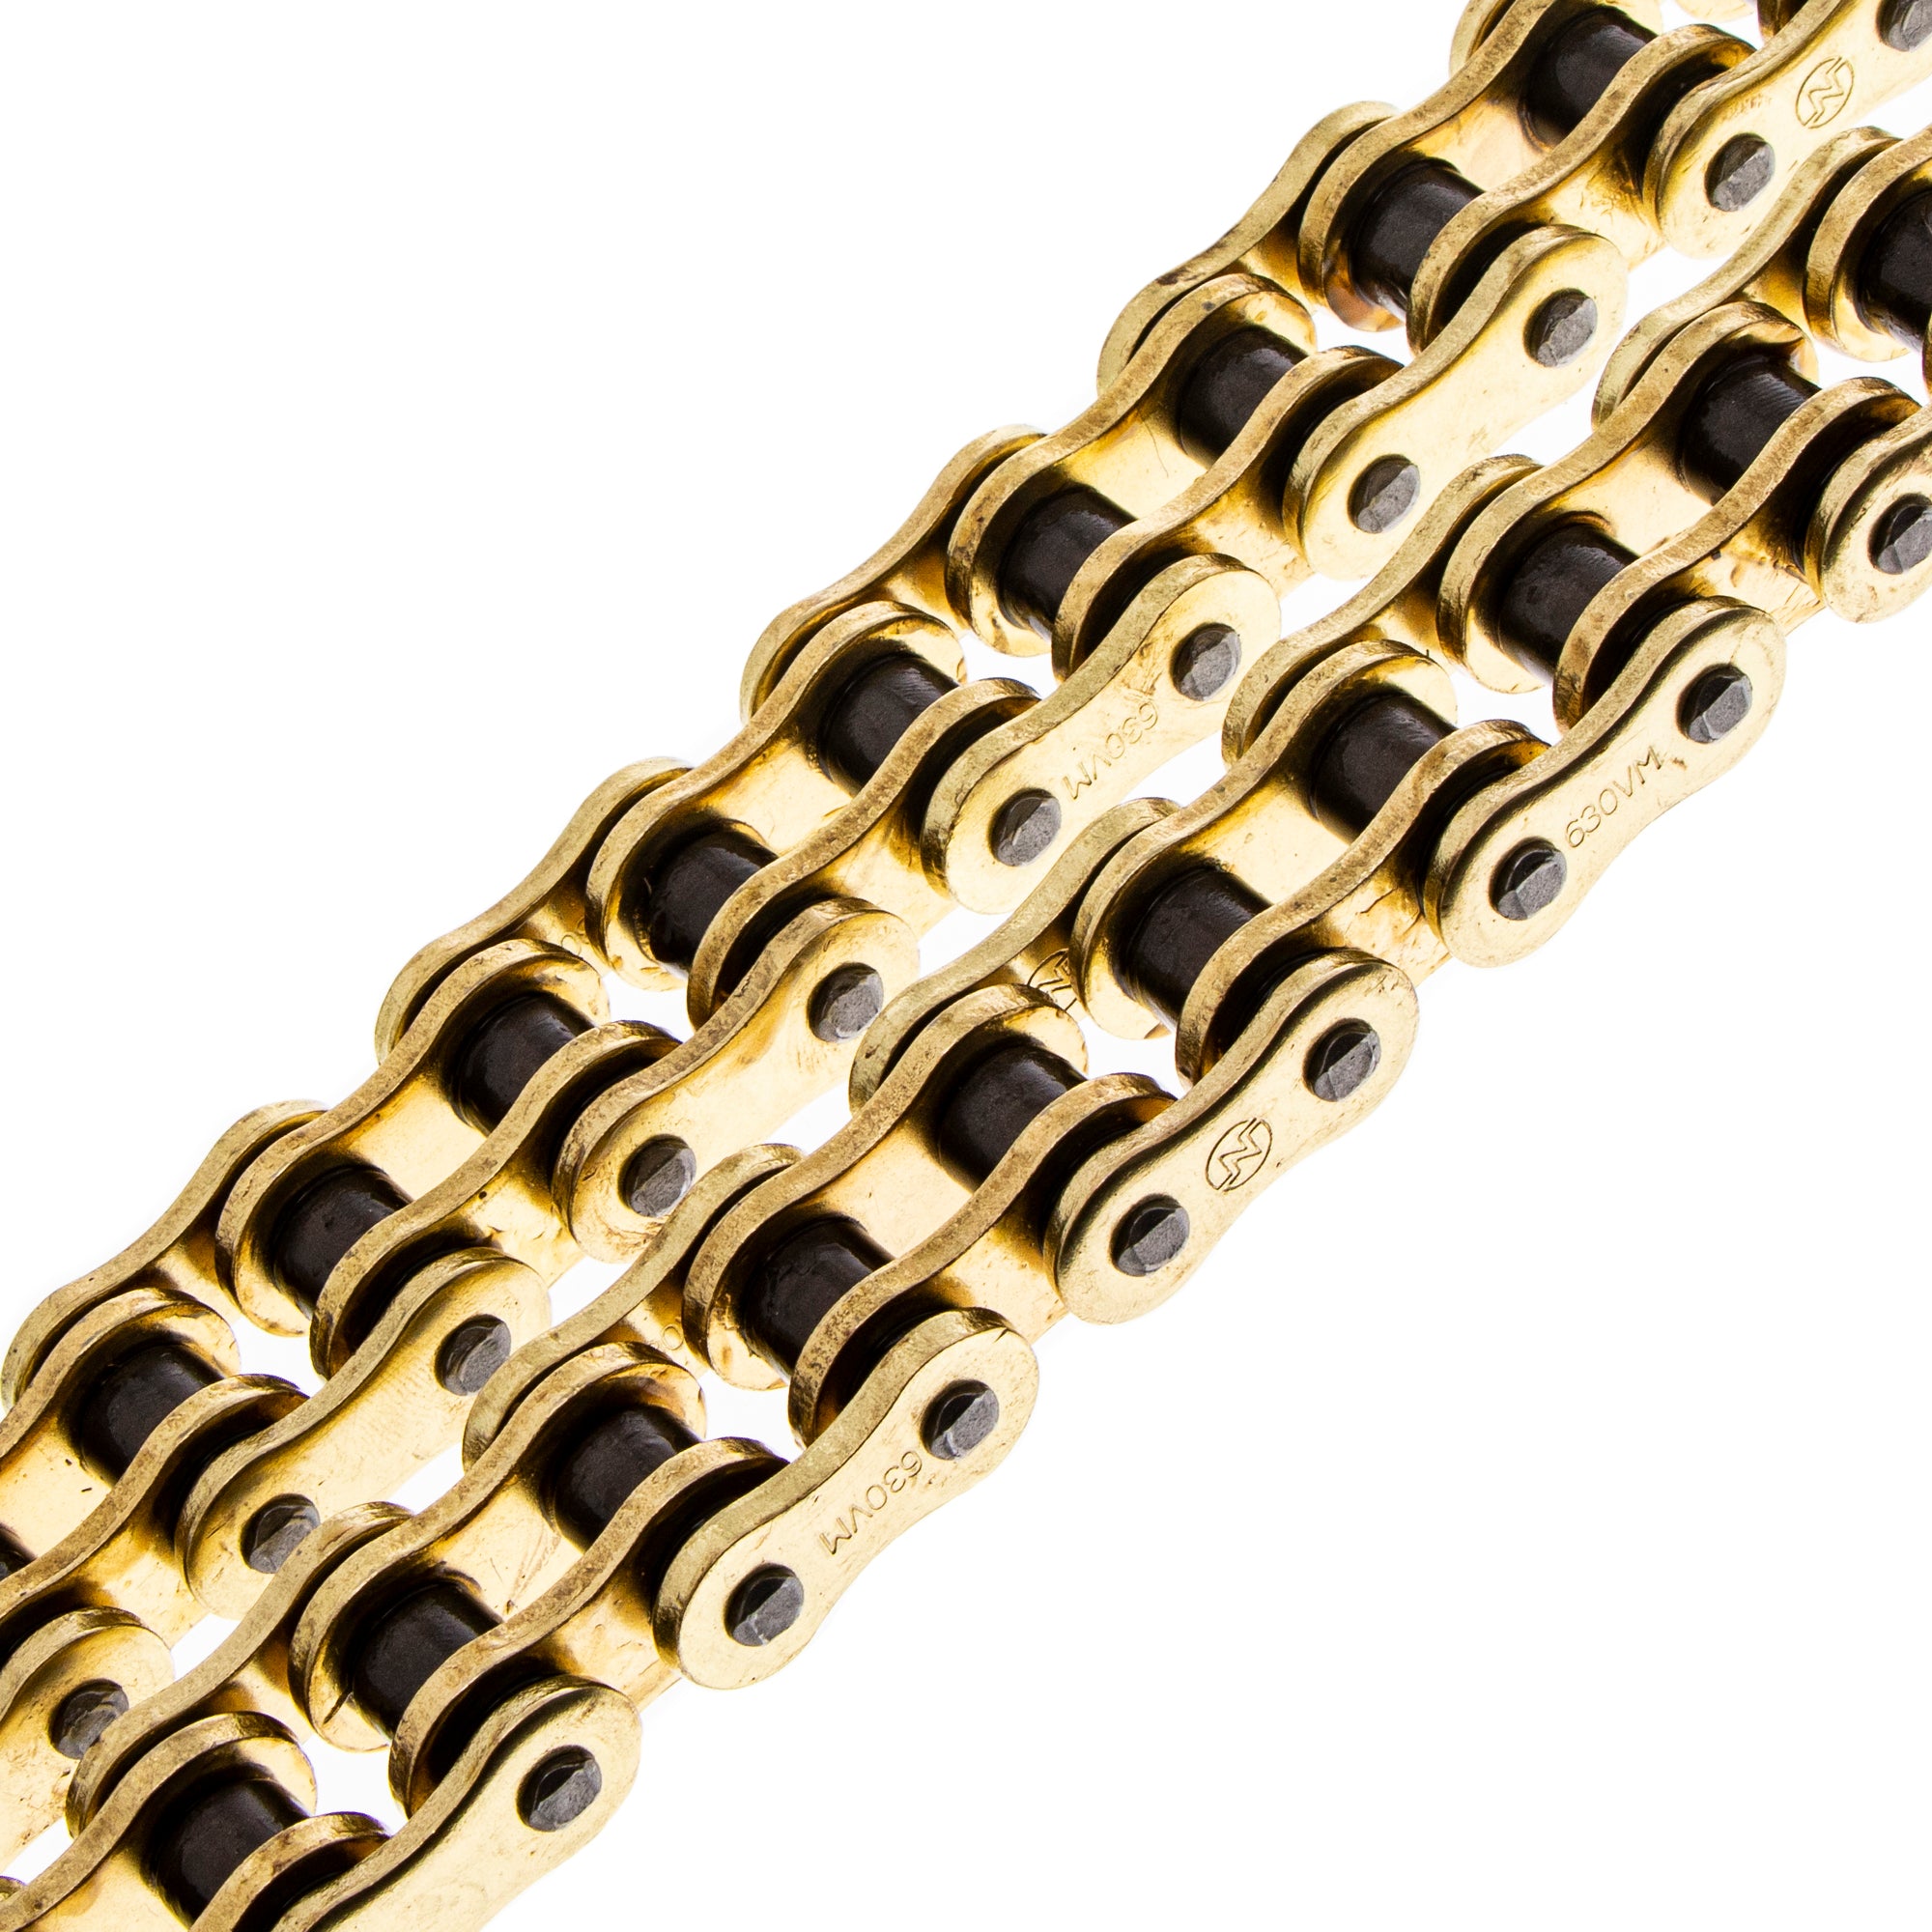 Gold X-Ring Chain 100 w/ Master Link for MURRAY GPz1100 5510 NICHE 519-CDC2511H